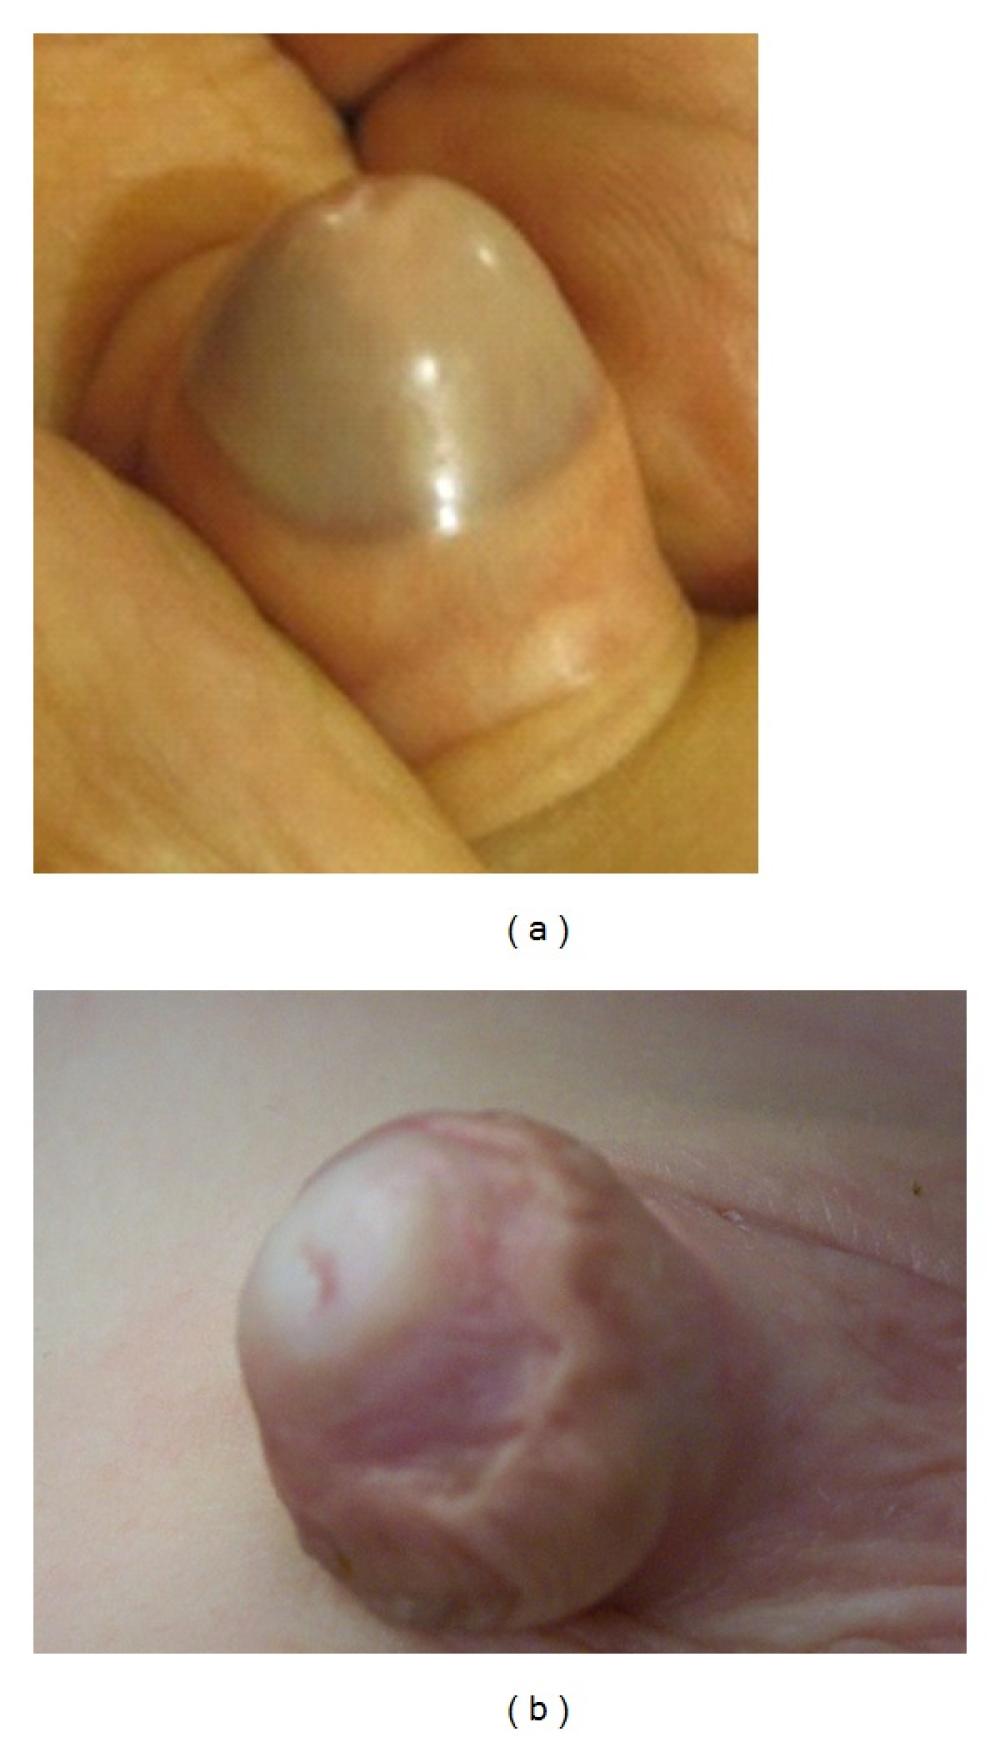  Adhesion of the skin of the neck of the penis to the head of the penis after circumcision